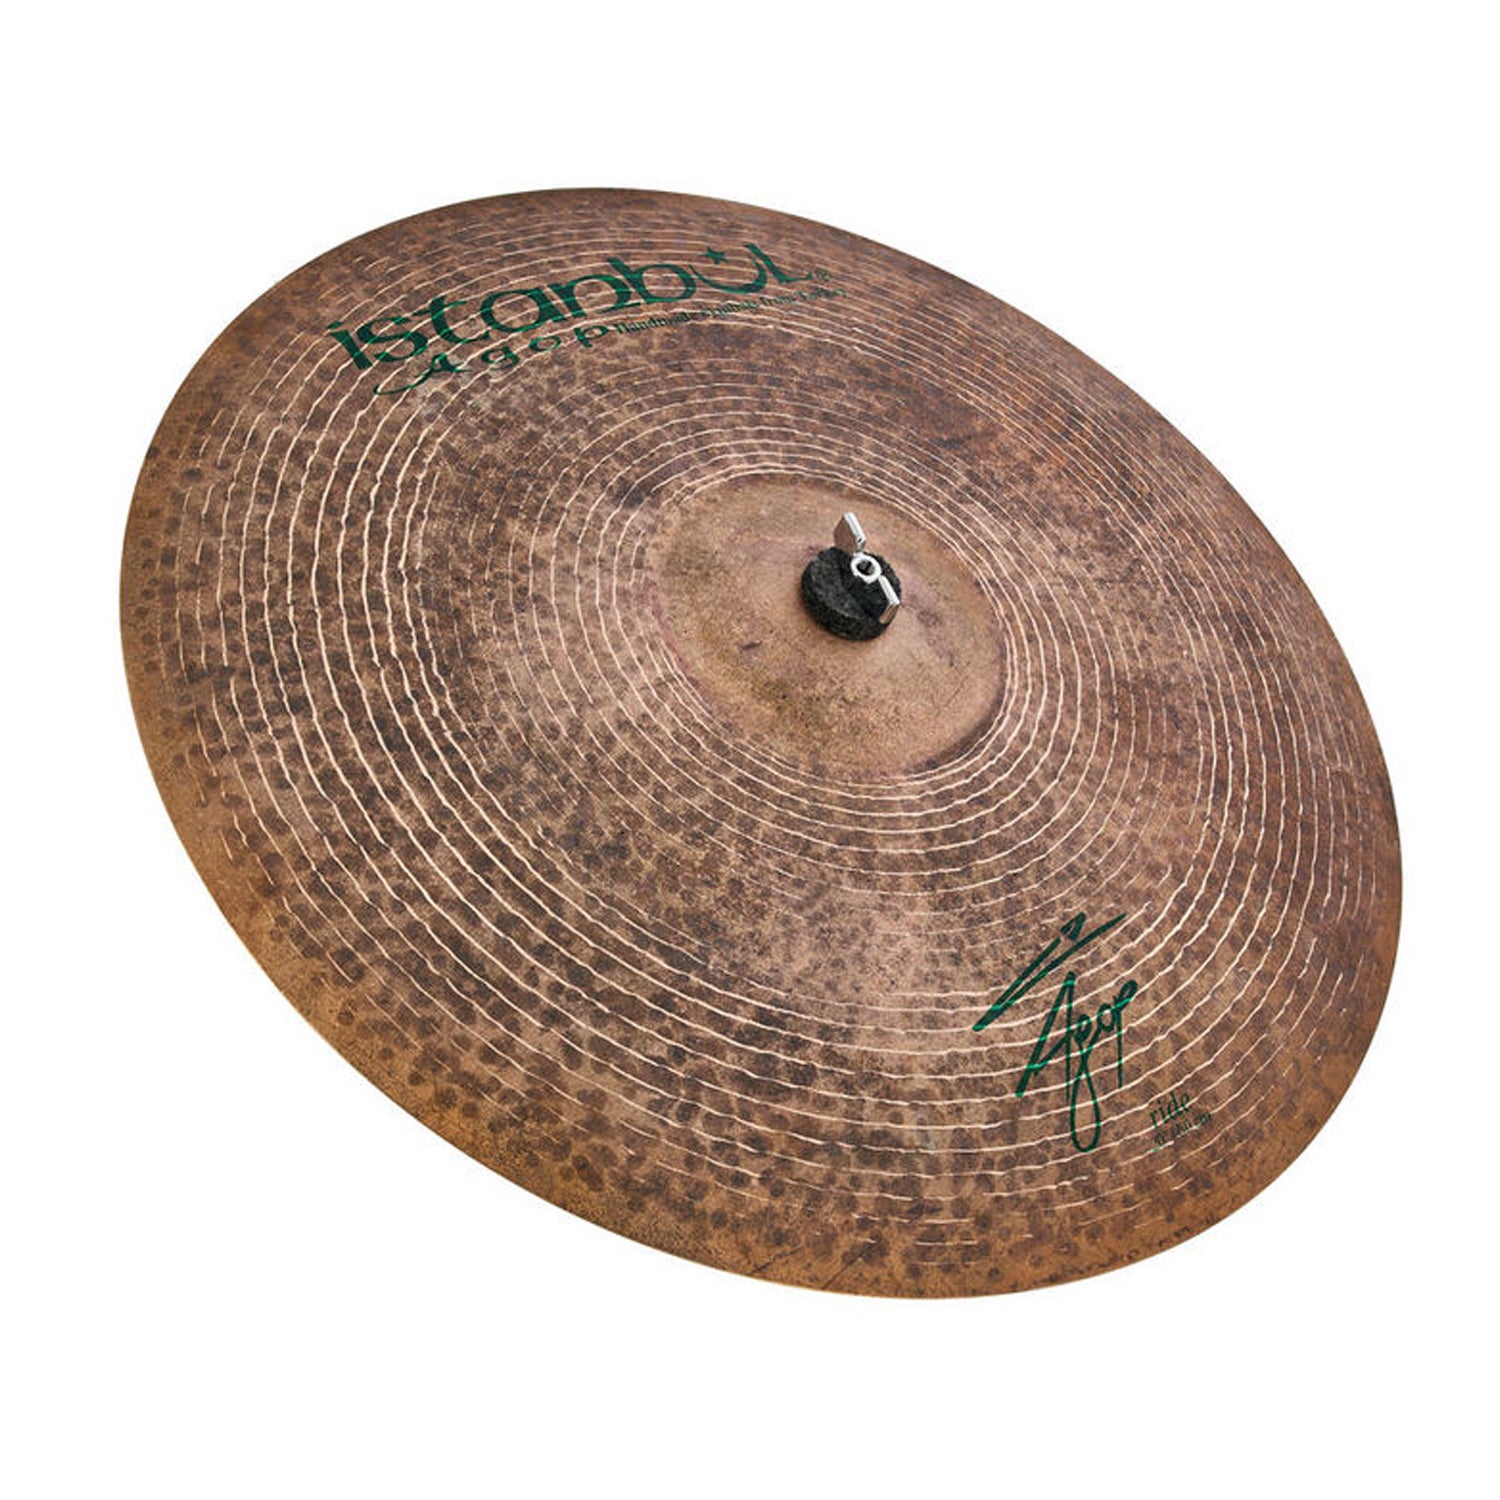 Istanbul Agr20 Agop Signature 20-inch Ride Cymbal | Music Works